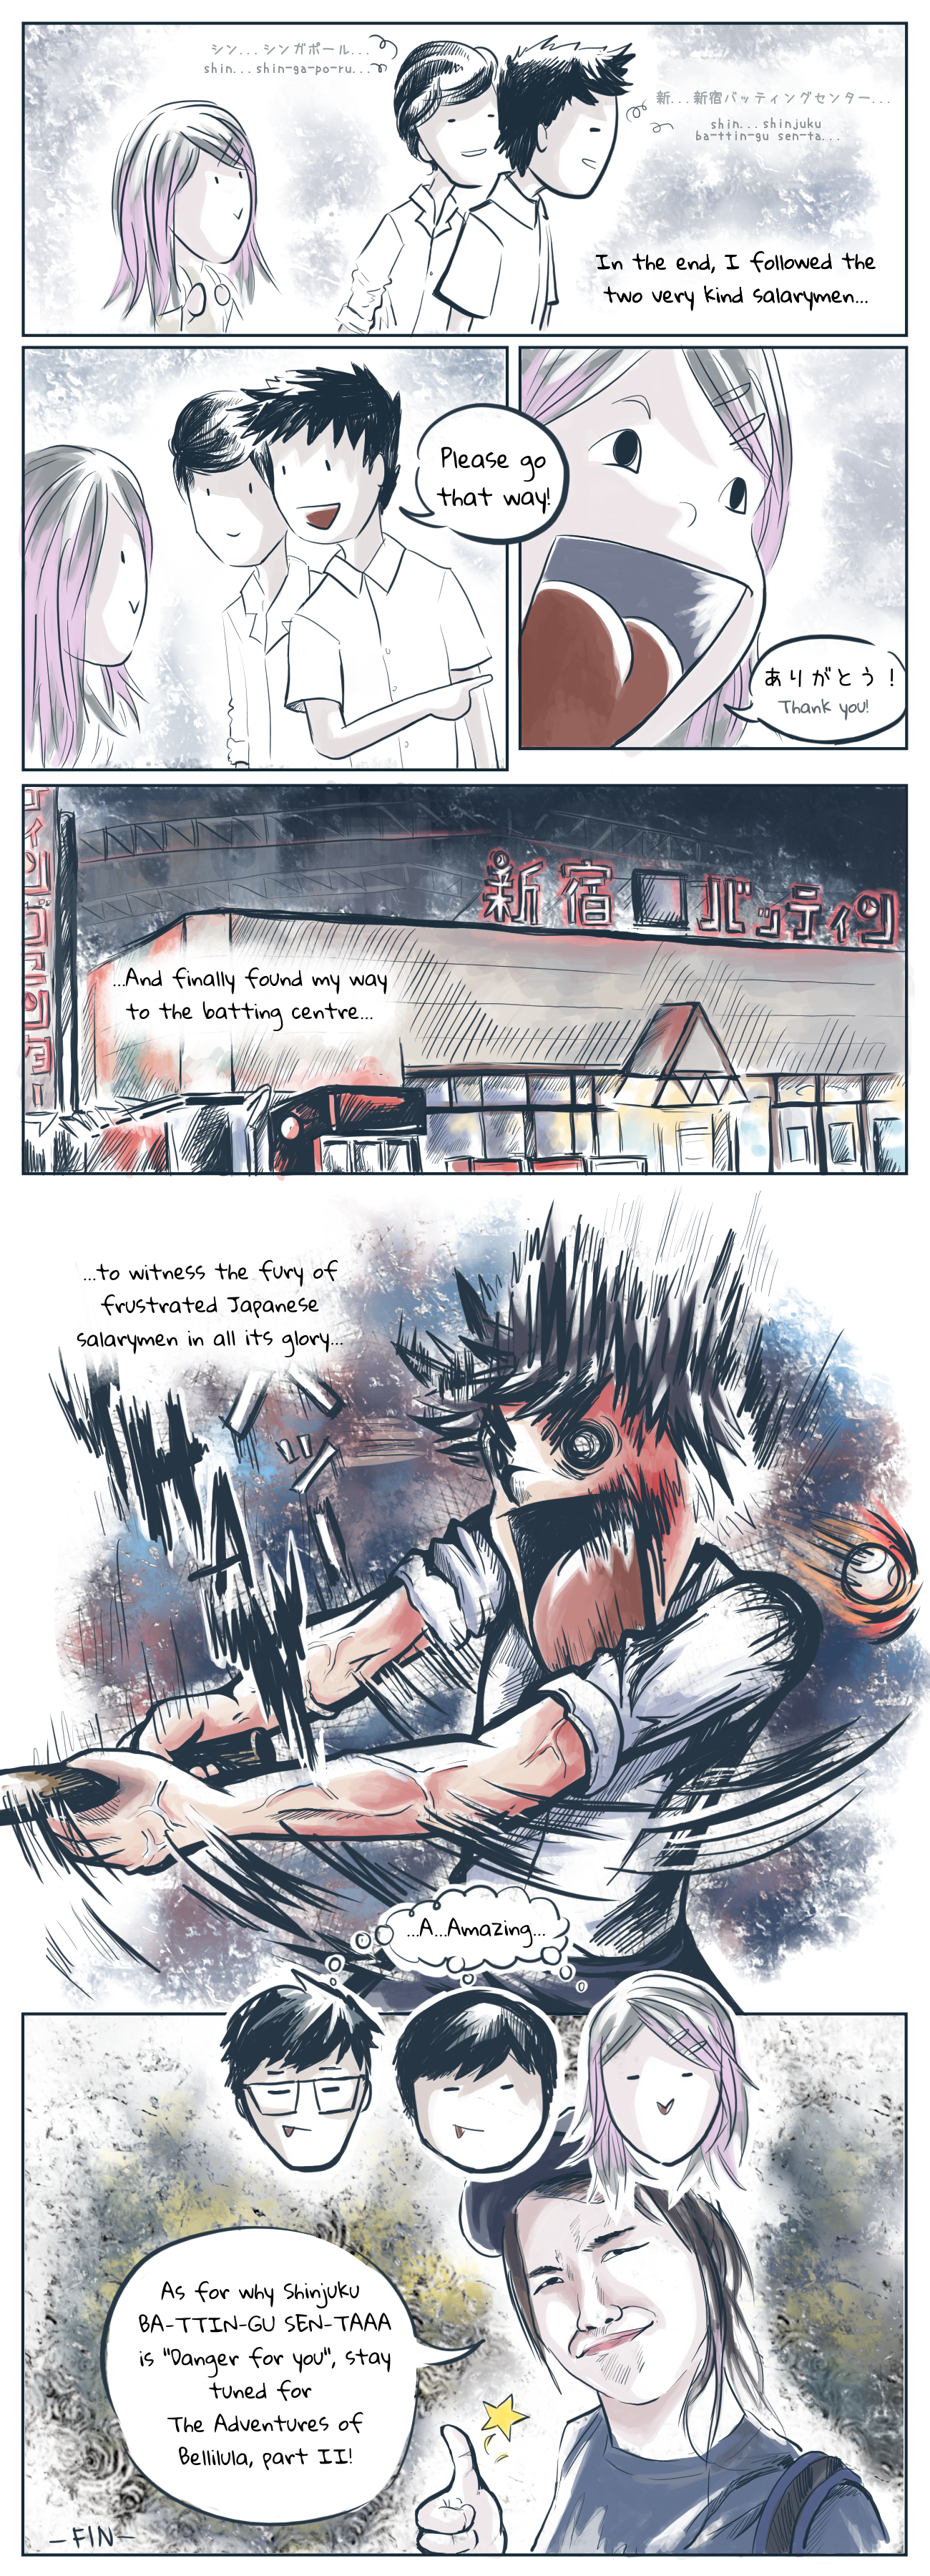 Page 2 of the episode 'The Adventures of Bellilula - Shinjuku Batting Center' of my webcomic, 'I Went to Japan', telling the story of my friend's adventures as she tries to find her way to Shinjuku, and finally makes it there to witness frustrated Japanese salaryman in all their batting glory.